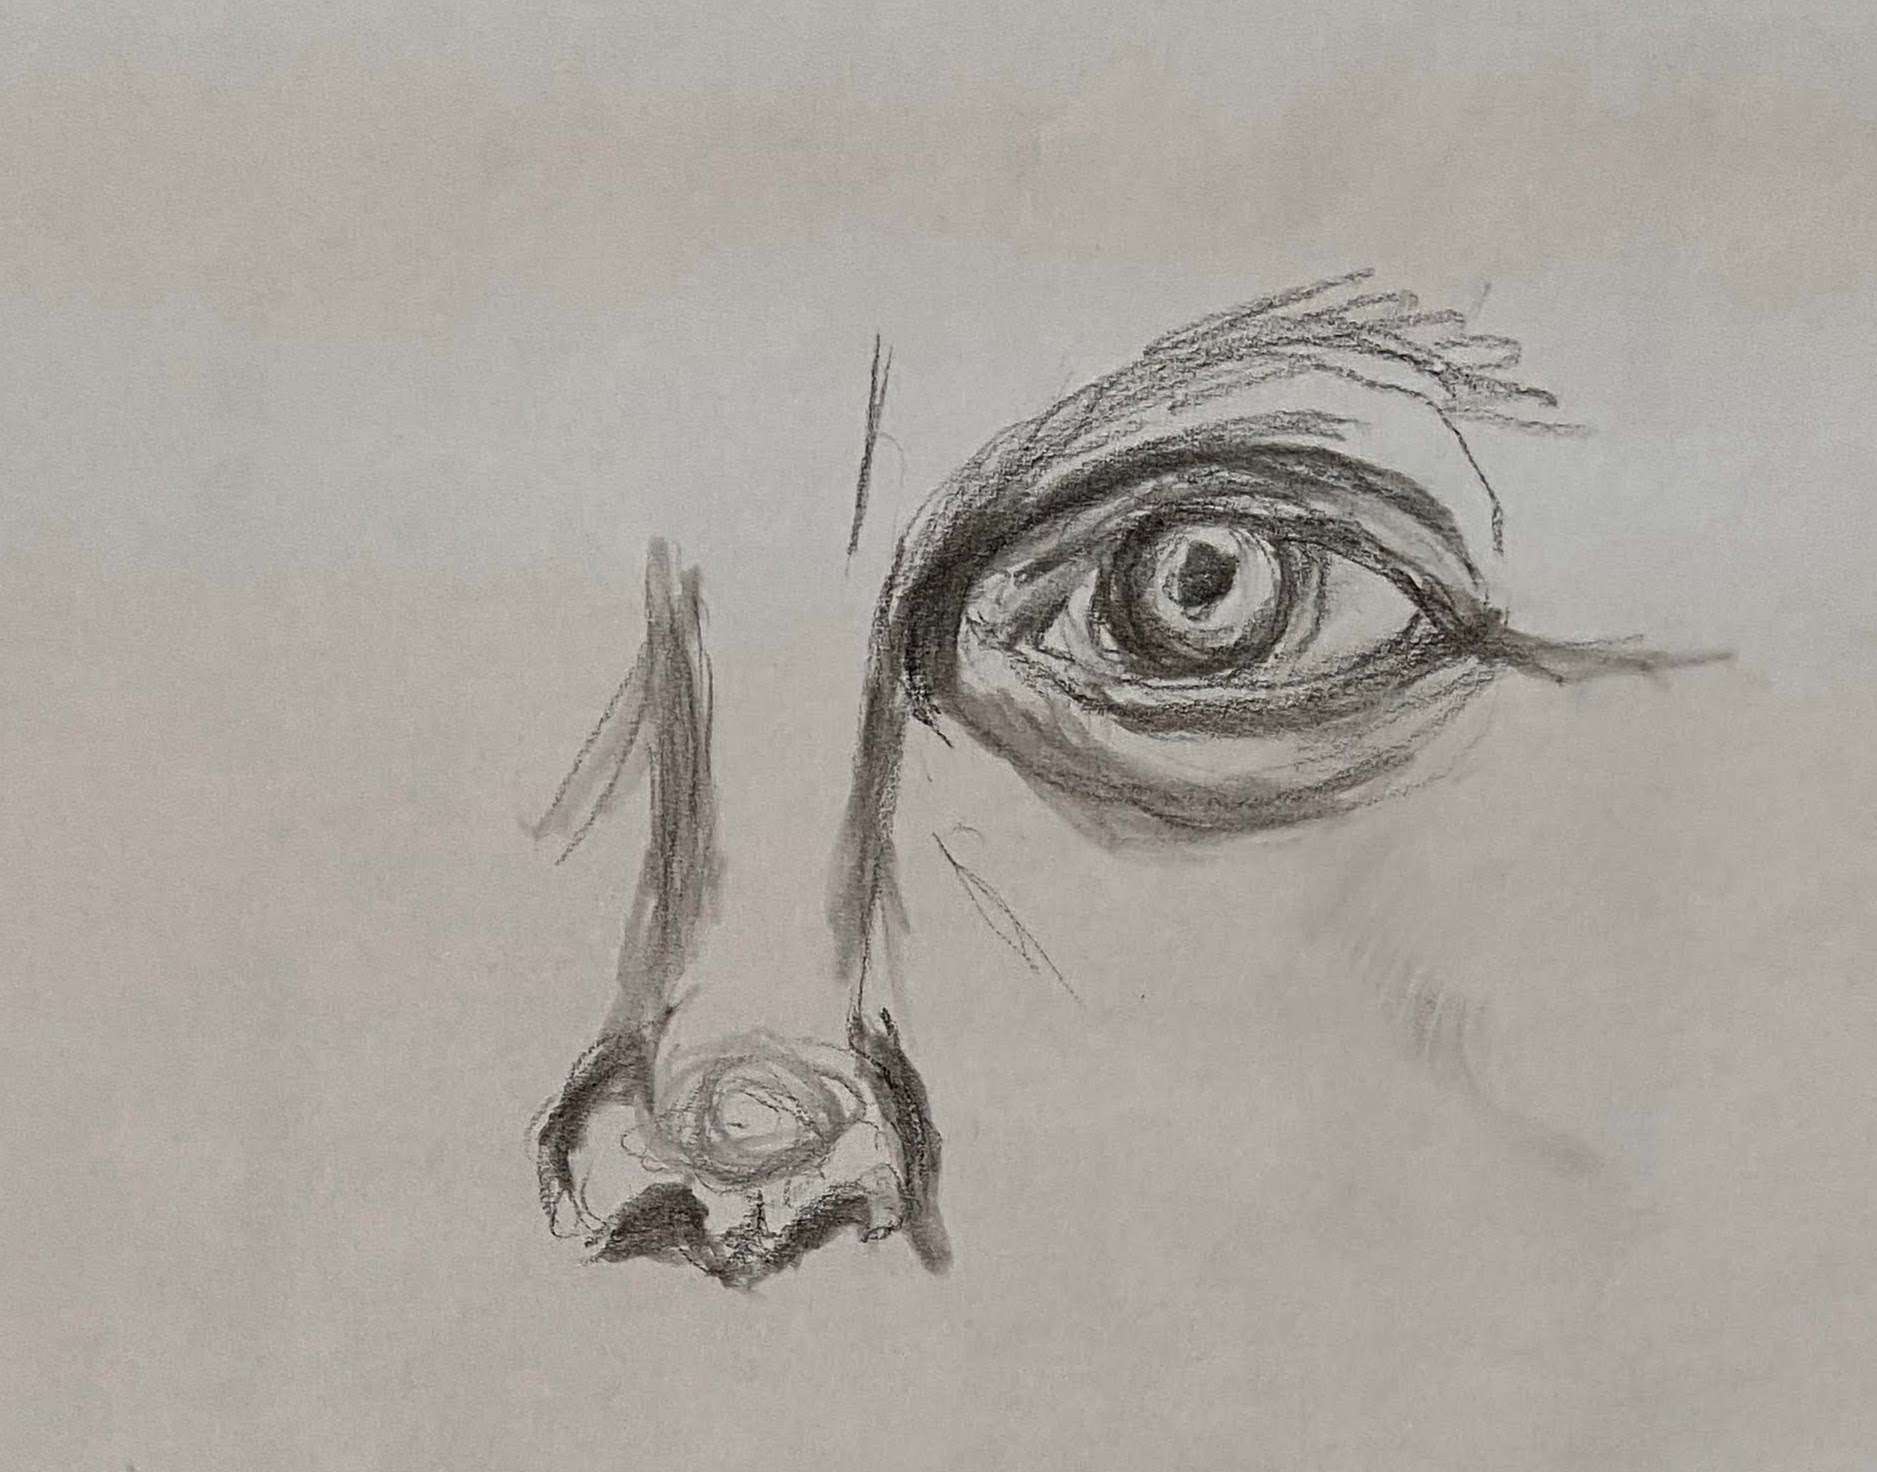 Charcoal drawing of the author's eye and nose